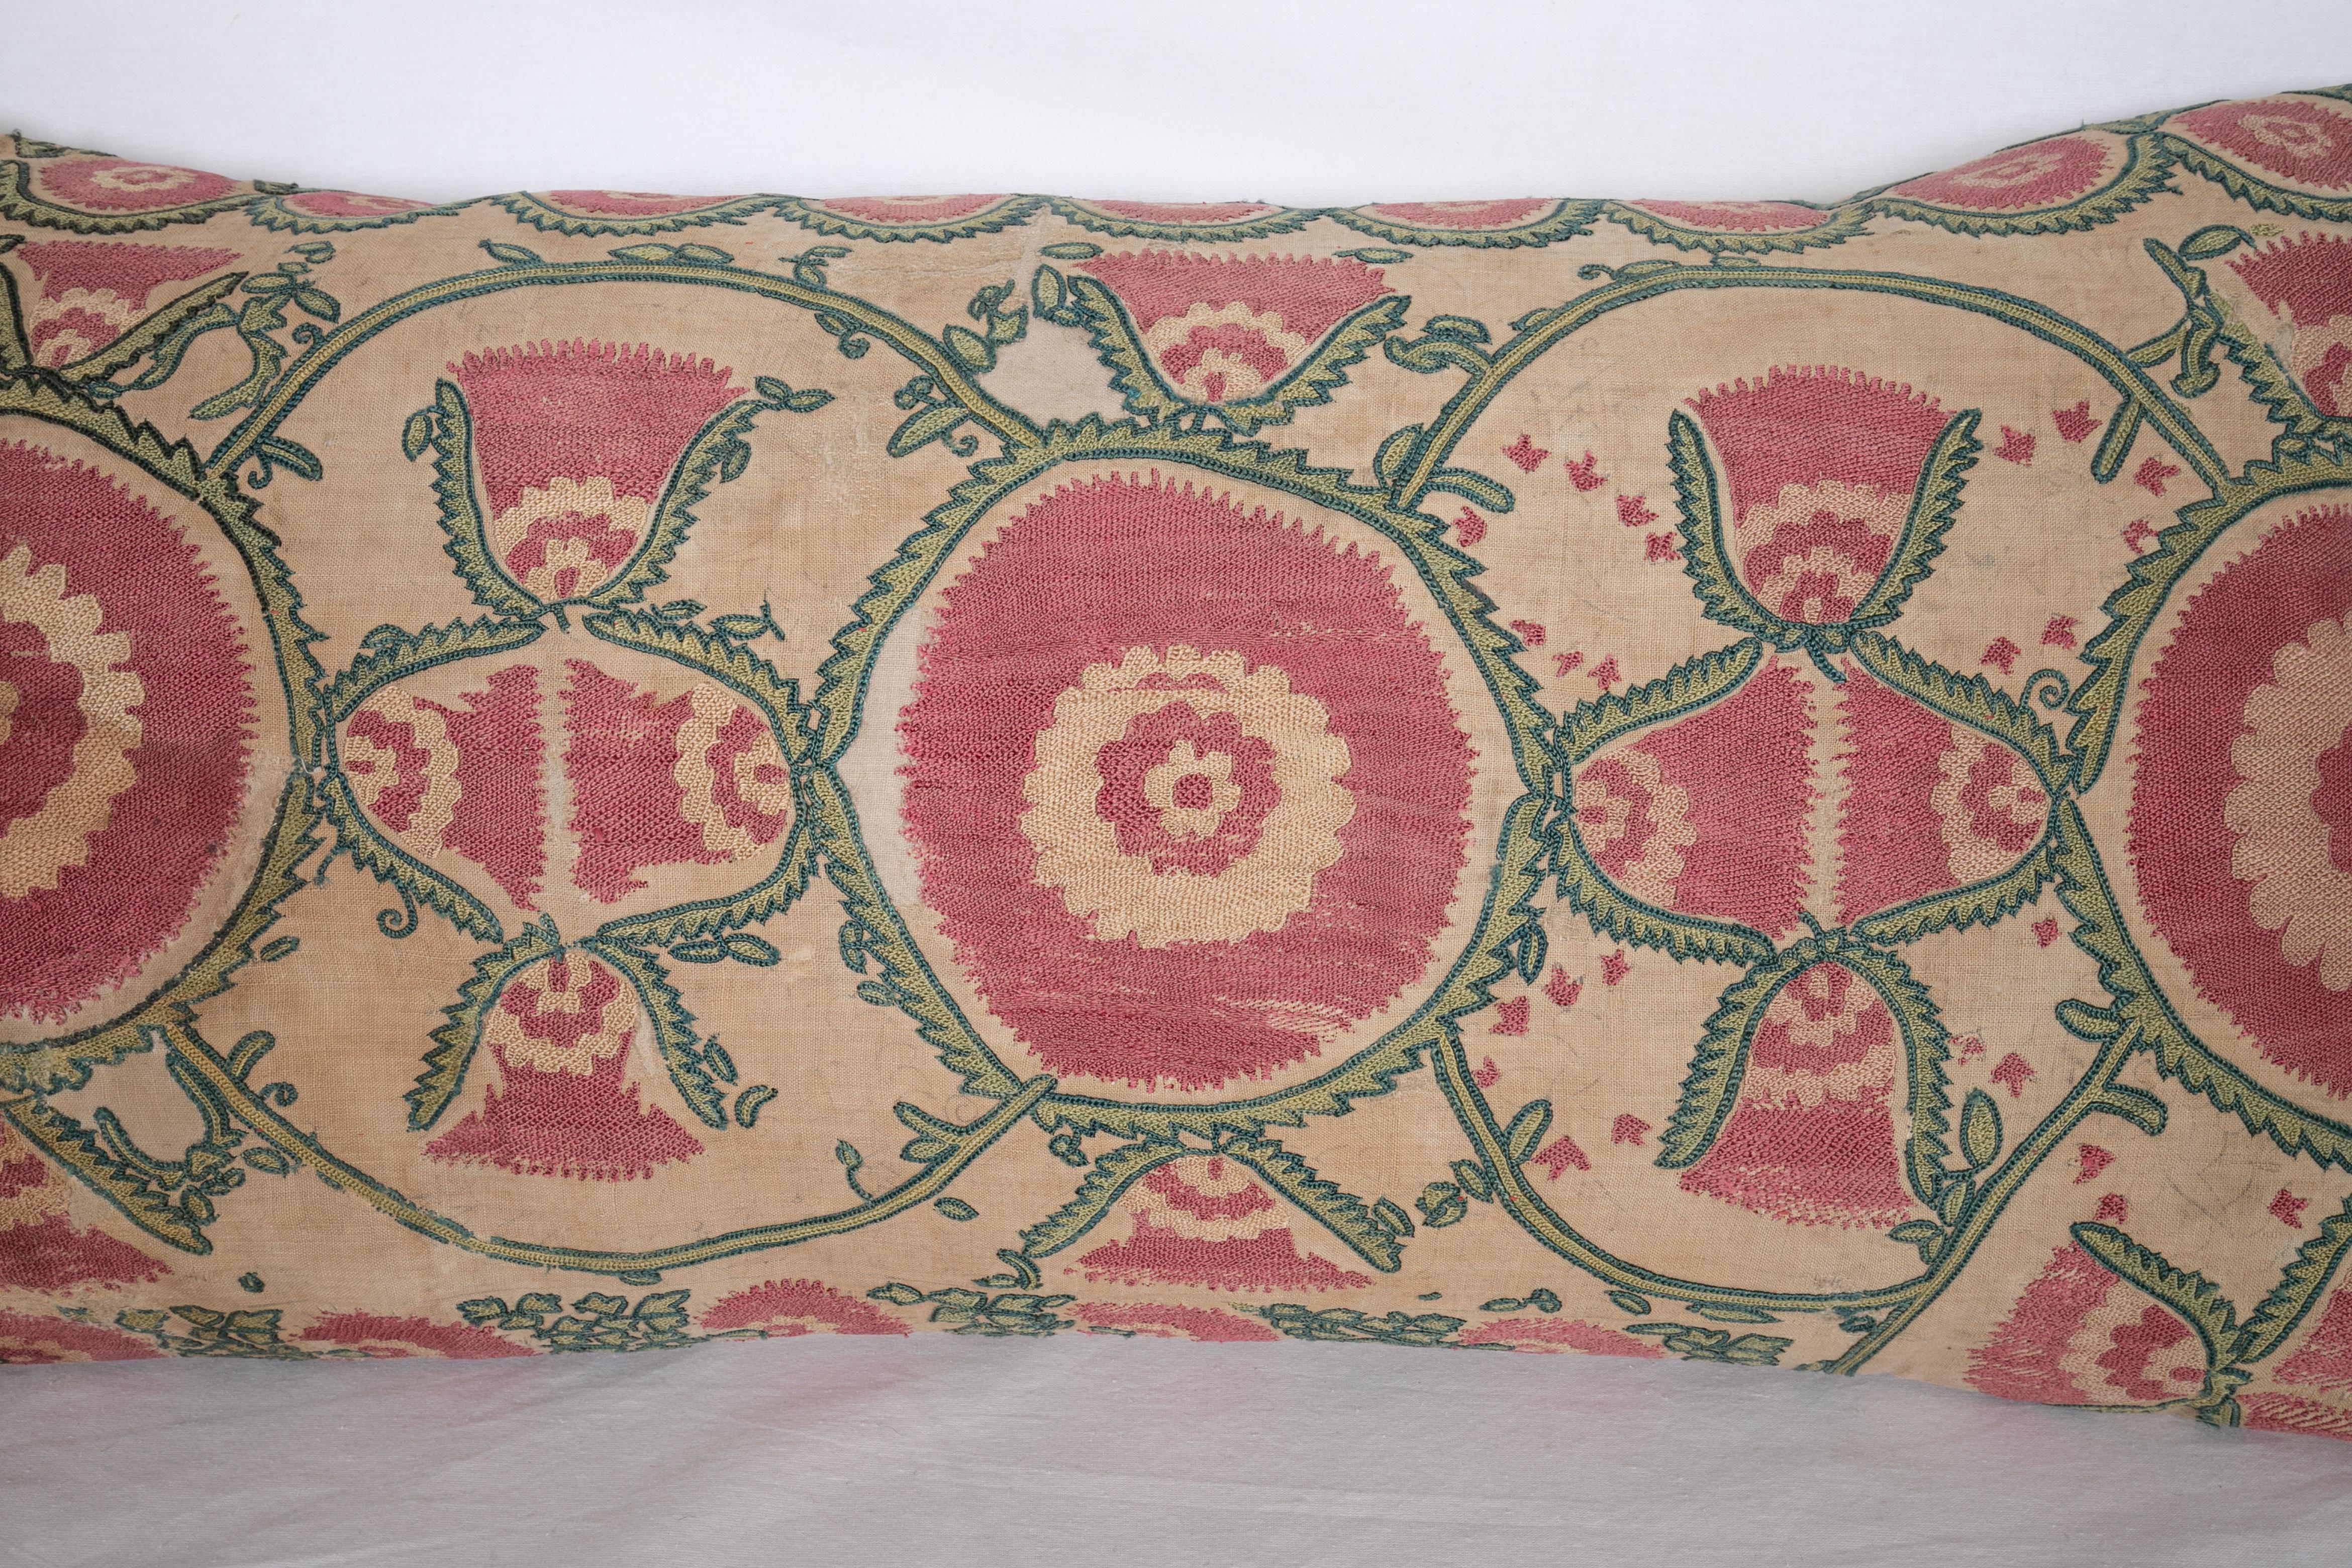 Embroidered Antique Suzani Pillow Case Fashioned from a Mid-19th Century, Ura Tube Suzani